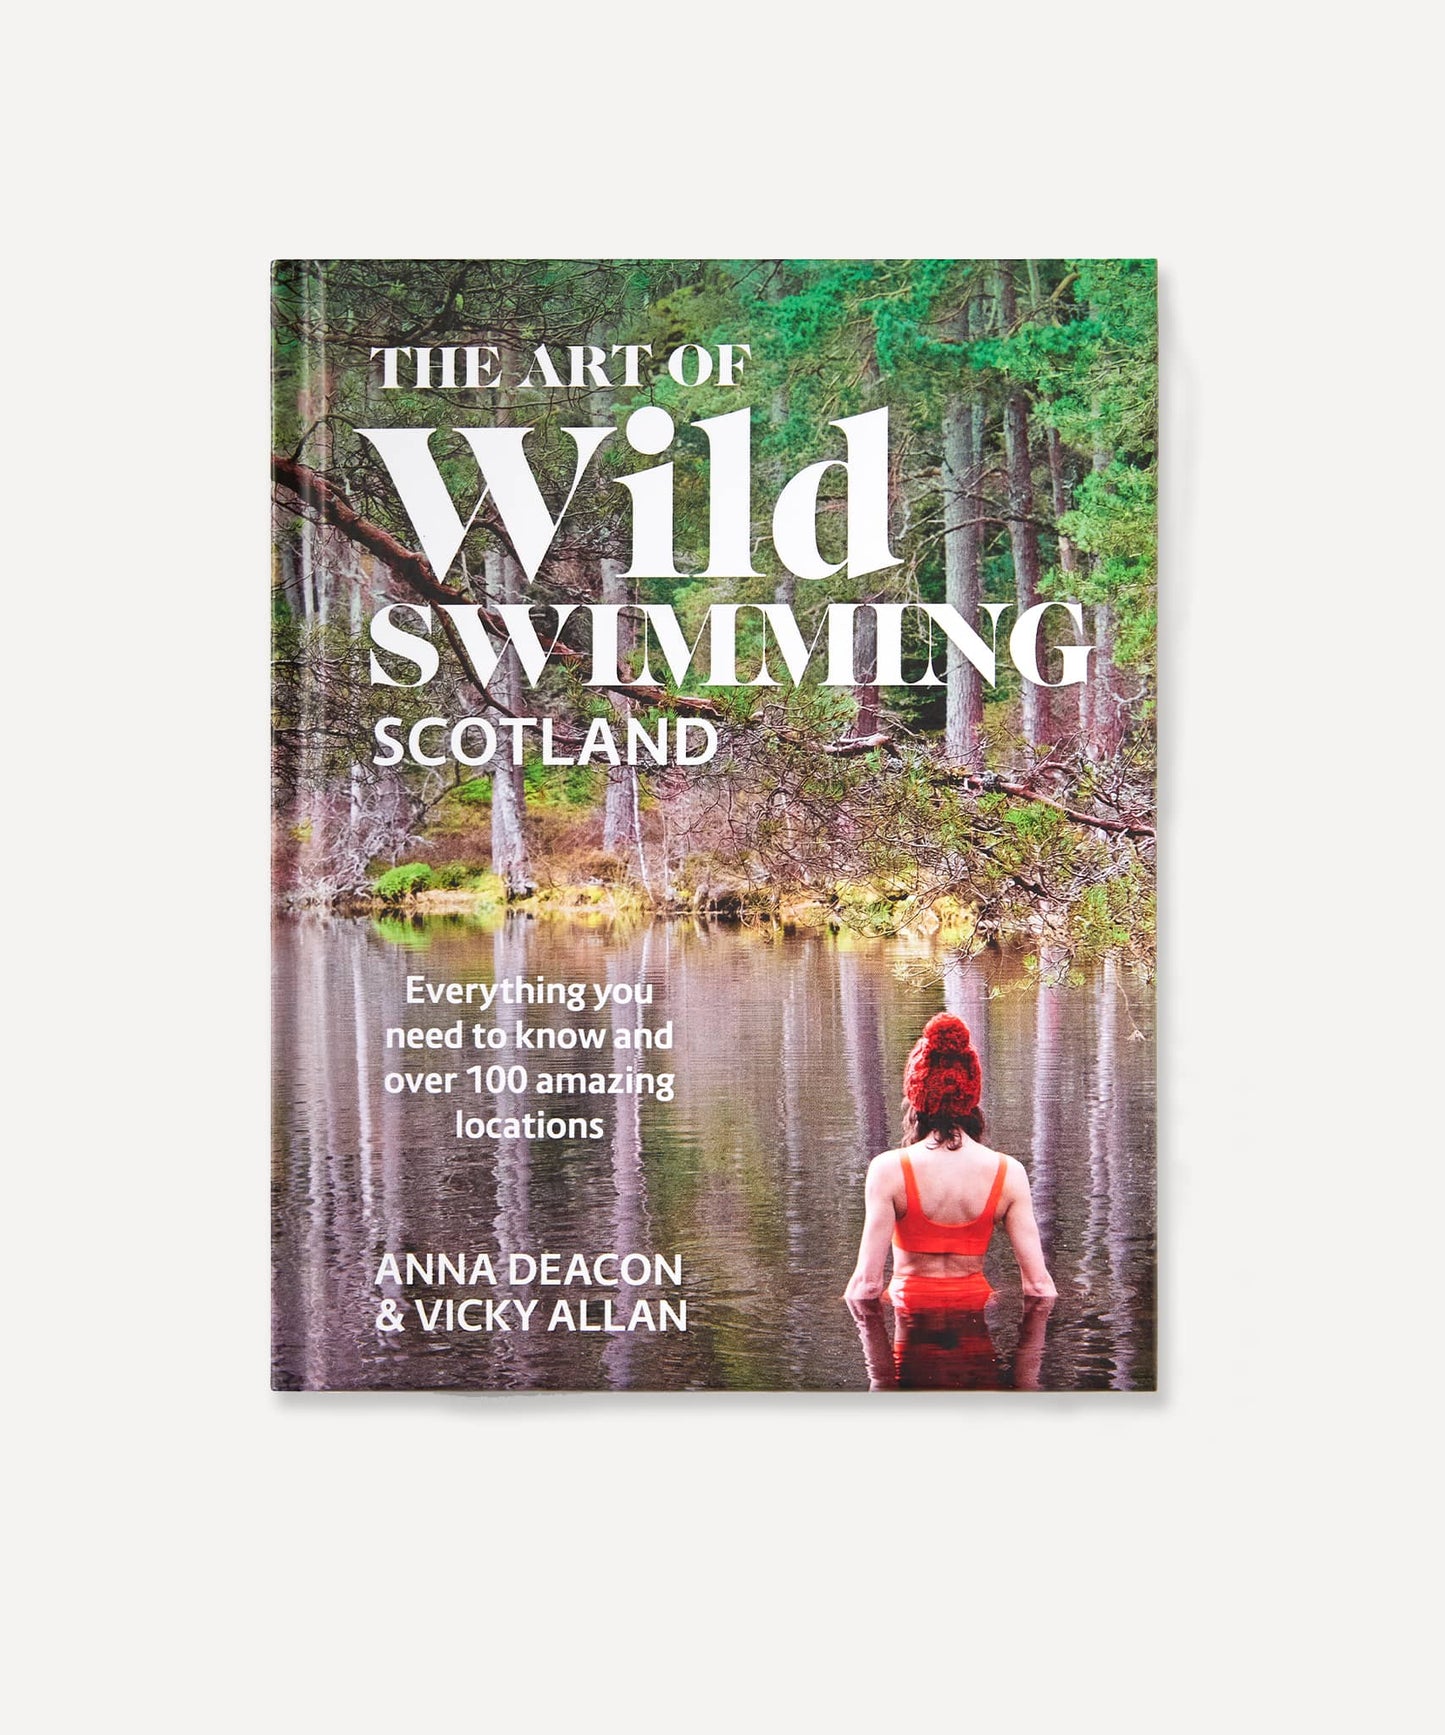 The Art Of Wild Swimming Scotland Book by Anna Deacon and Vicky Allan - Cover